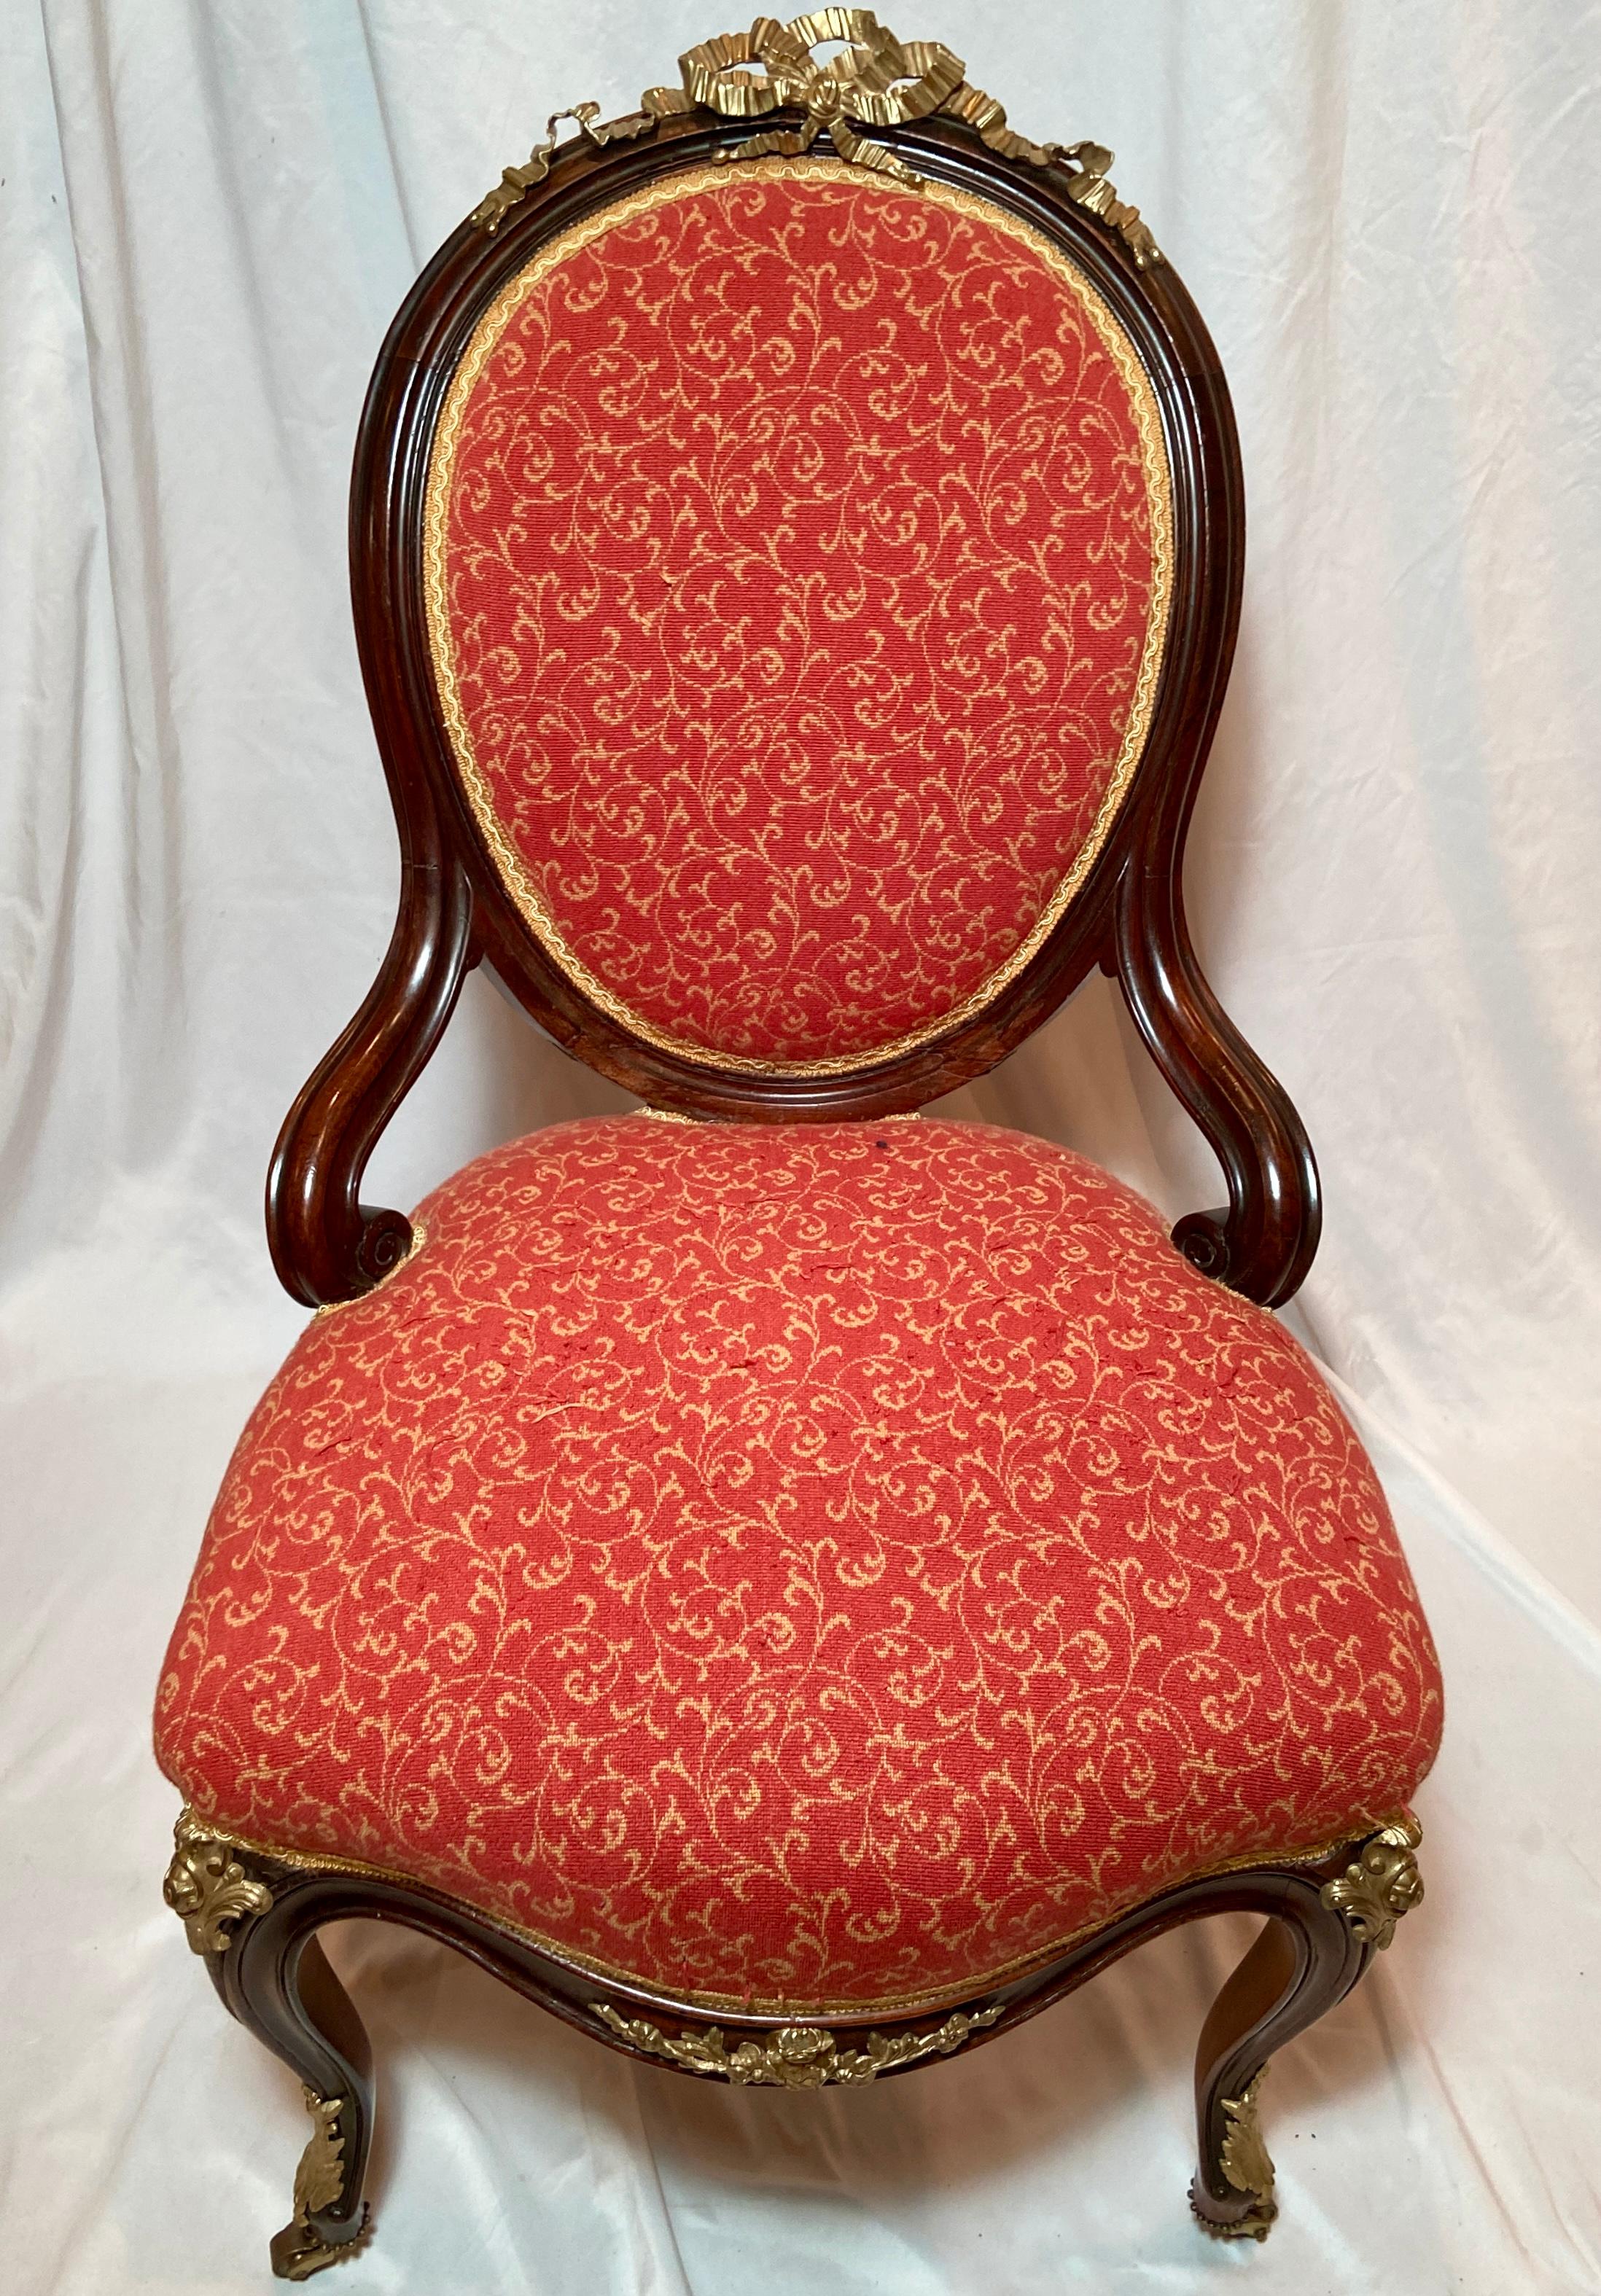 Antique French Louis Philippe gold bronze and rosewood parlor chair with red and gold upholstery, Circa 1880.